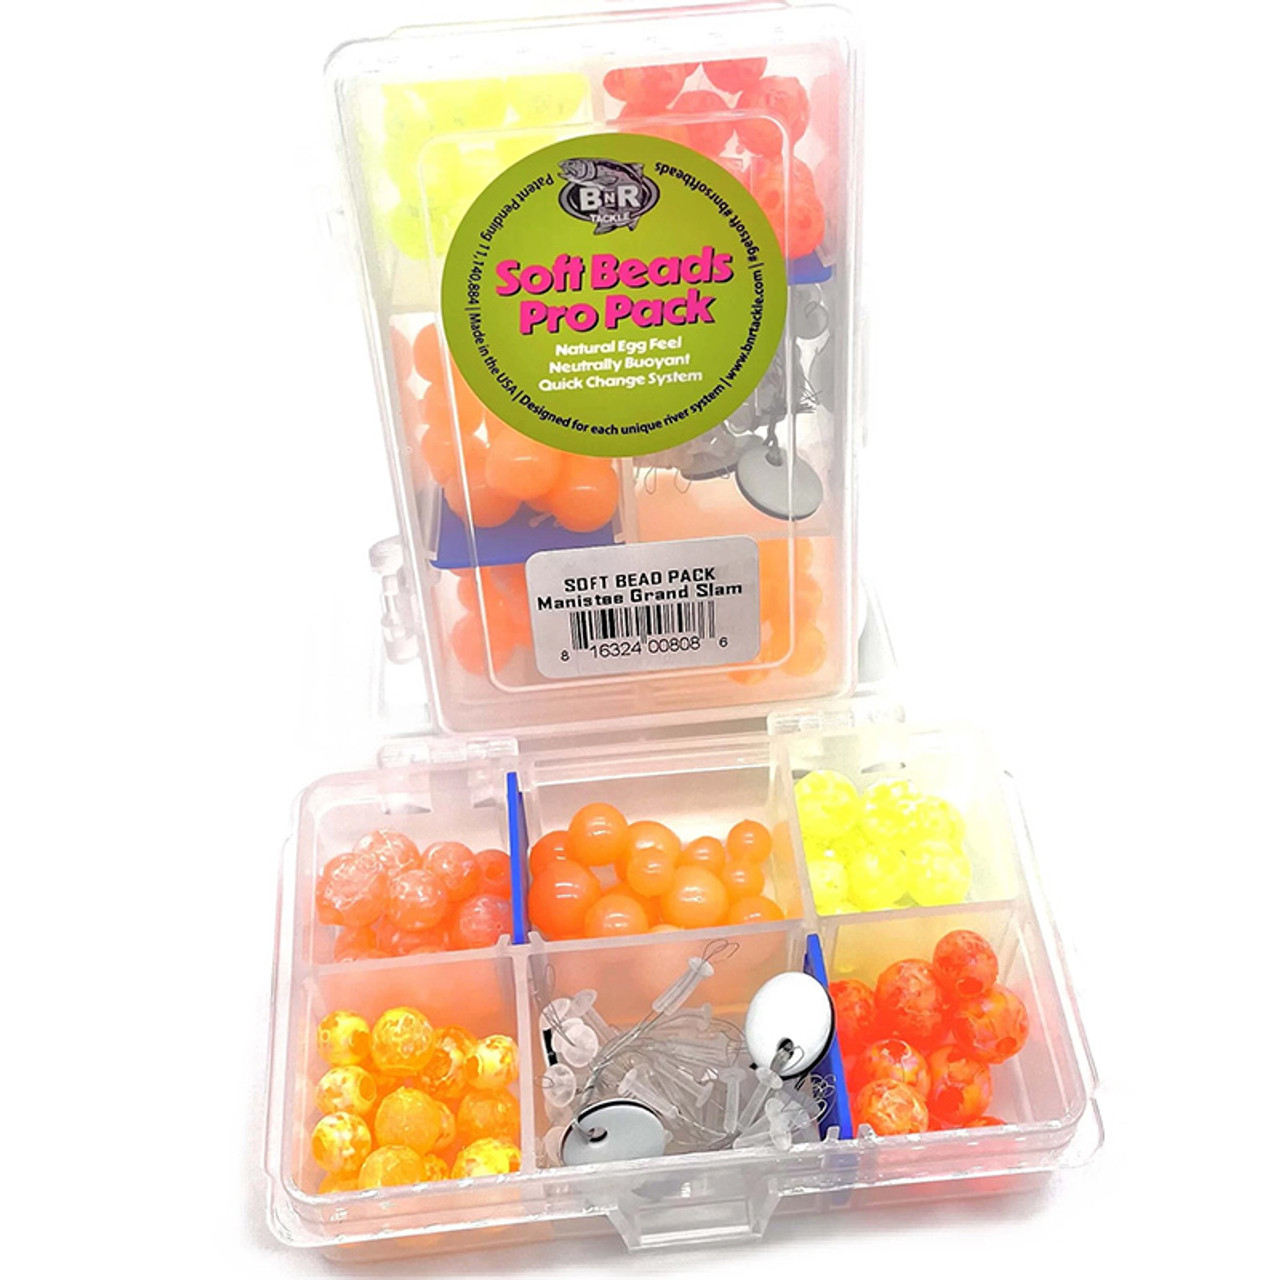 Manistee Grand Slam Soft Beads Pro Pack by BnR Tackle